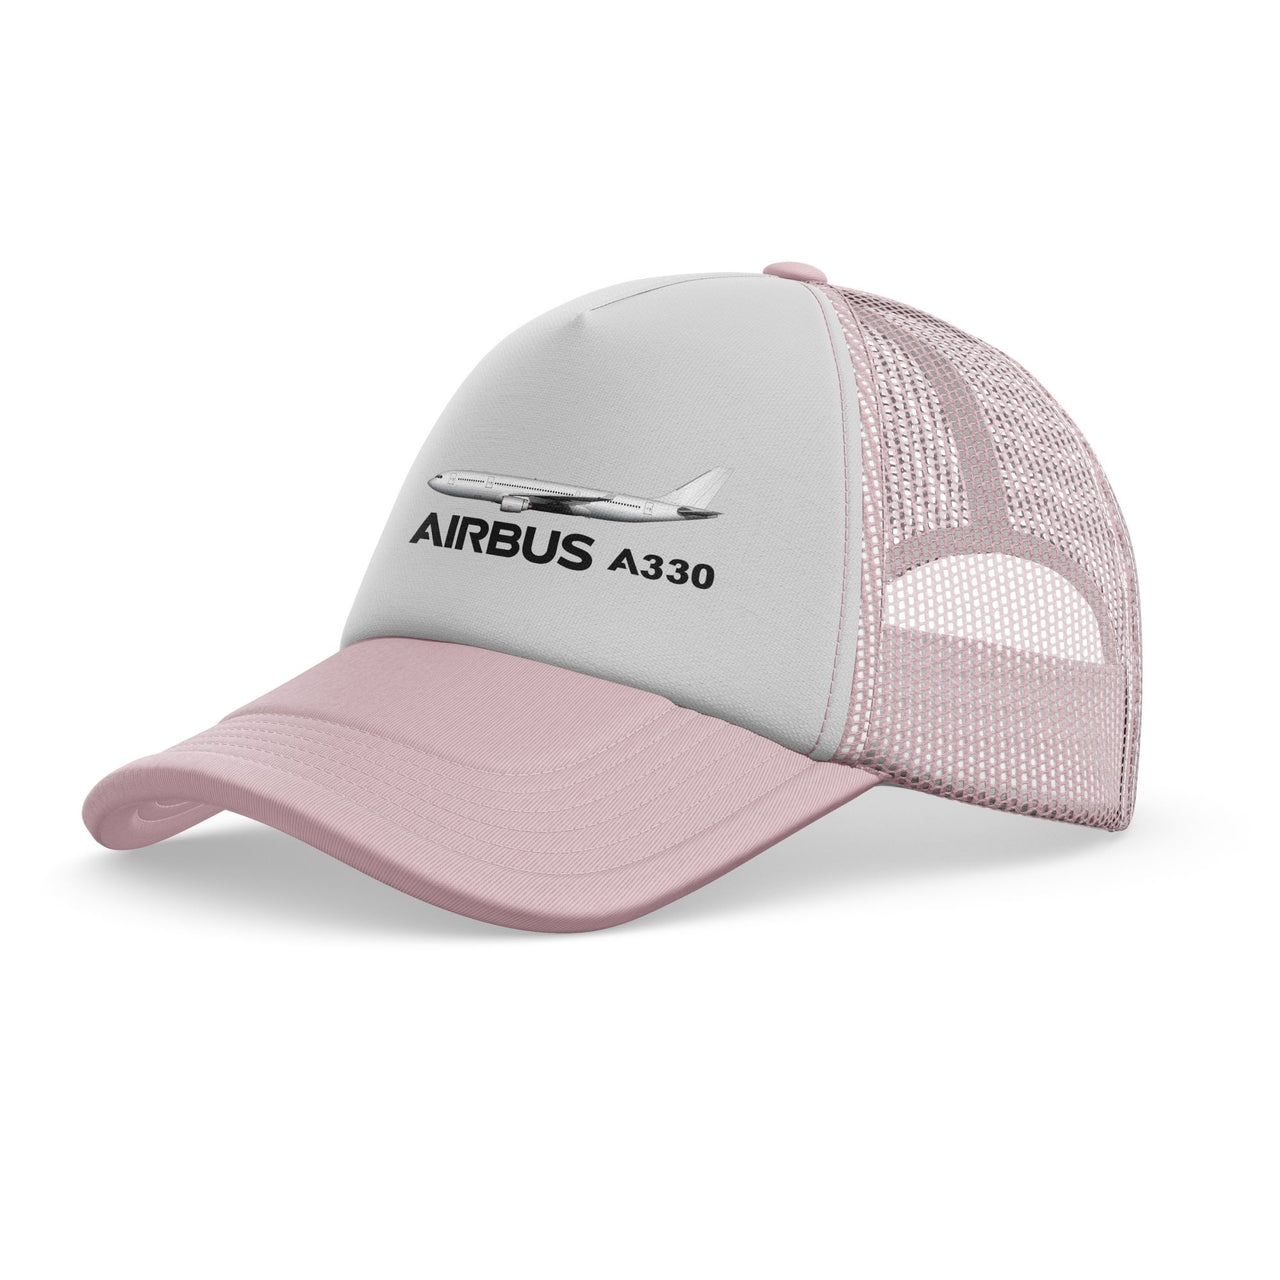 The Airbus A330 Designed Trucker Caps & Hats